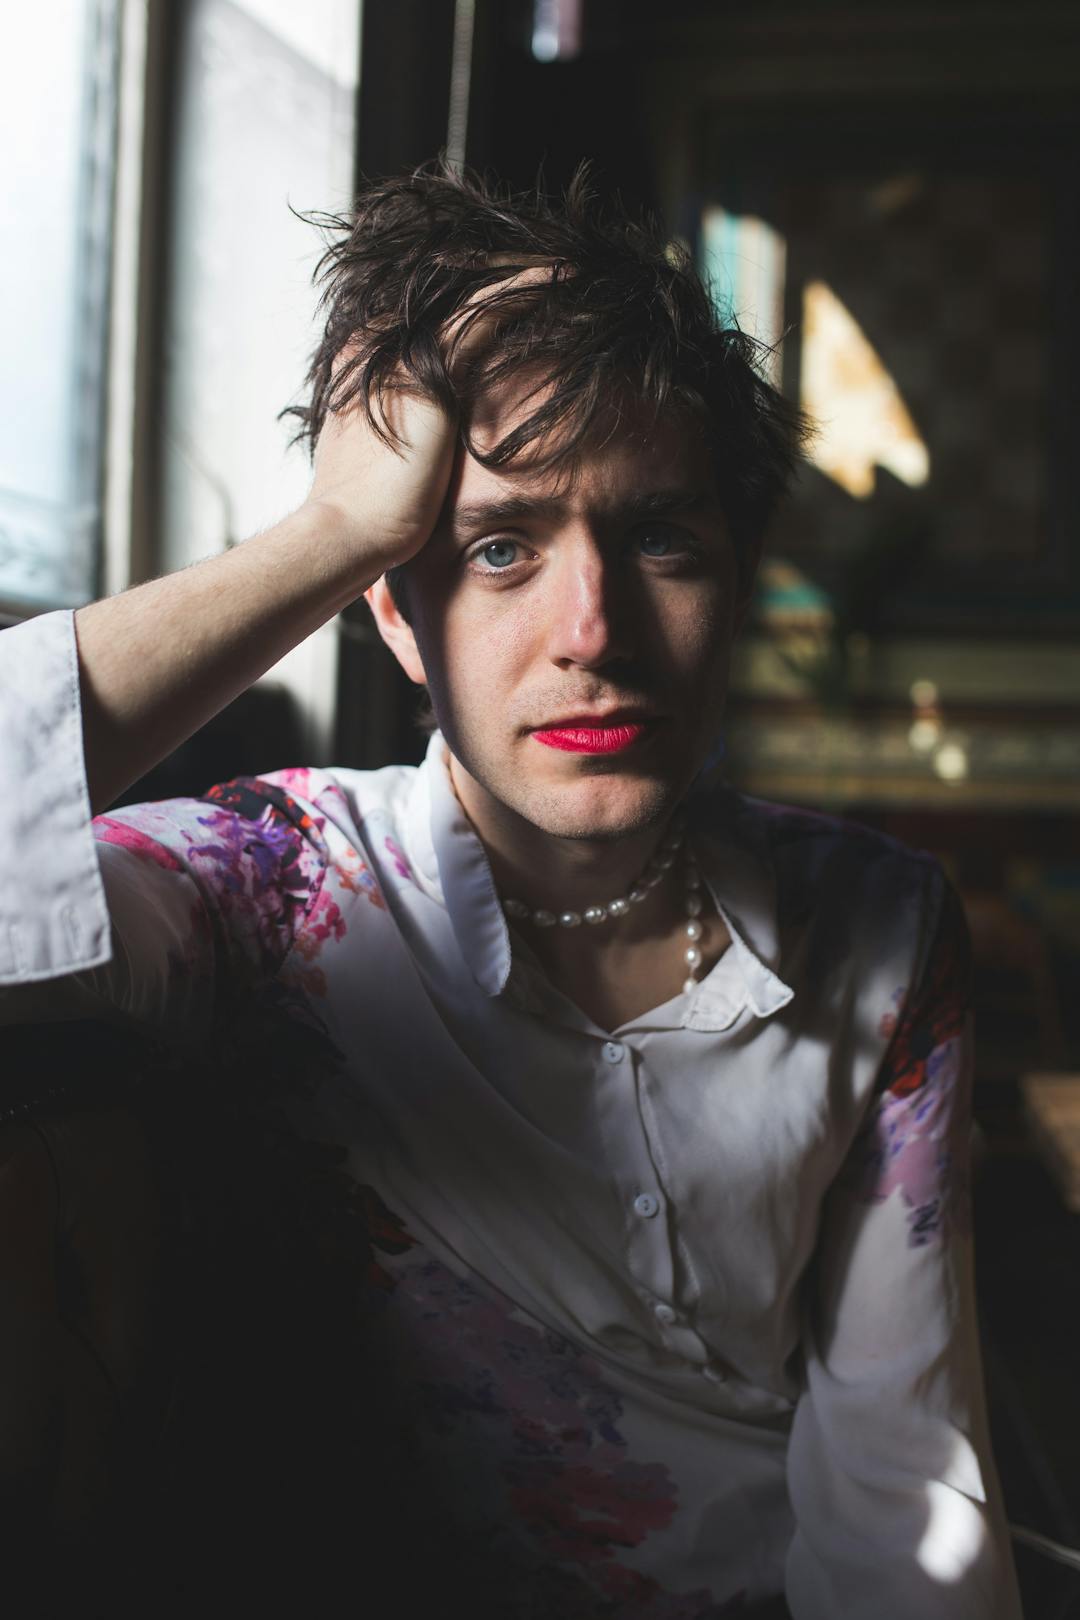 Ezra Furman: 'All queer people have to escape from a prison' | Huck